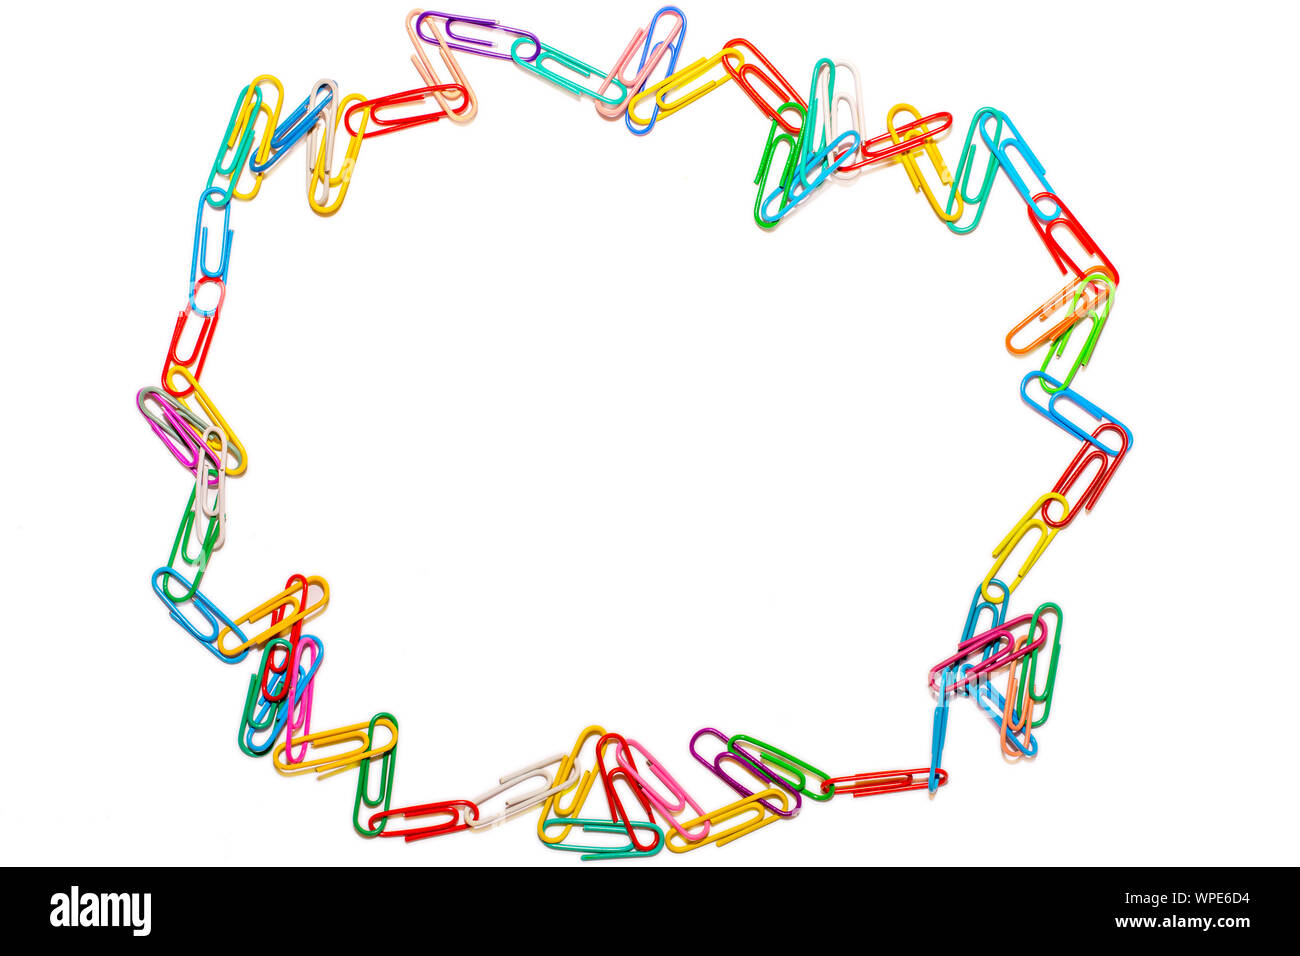 Wild circle of colored paper clips on white background Stock Photo